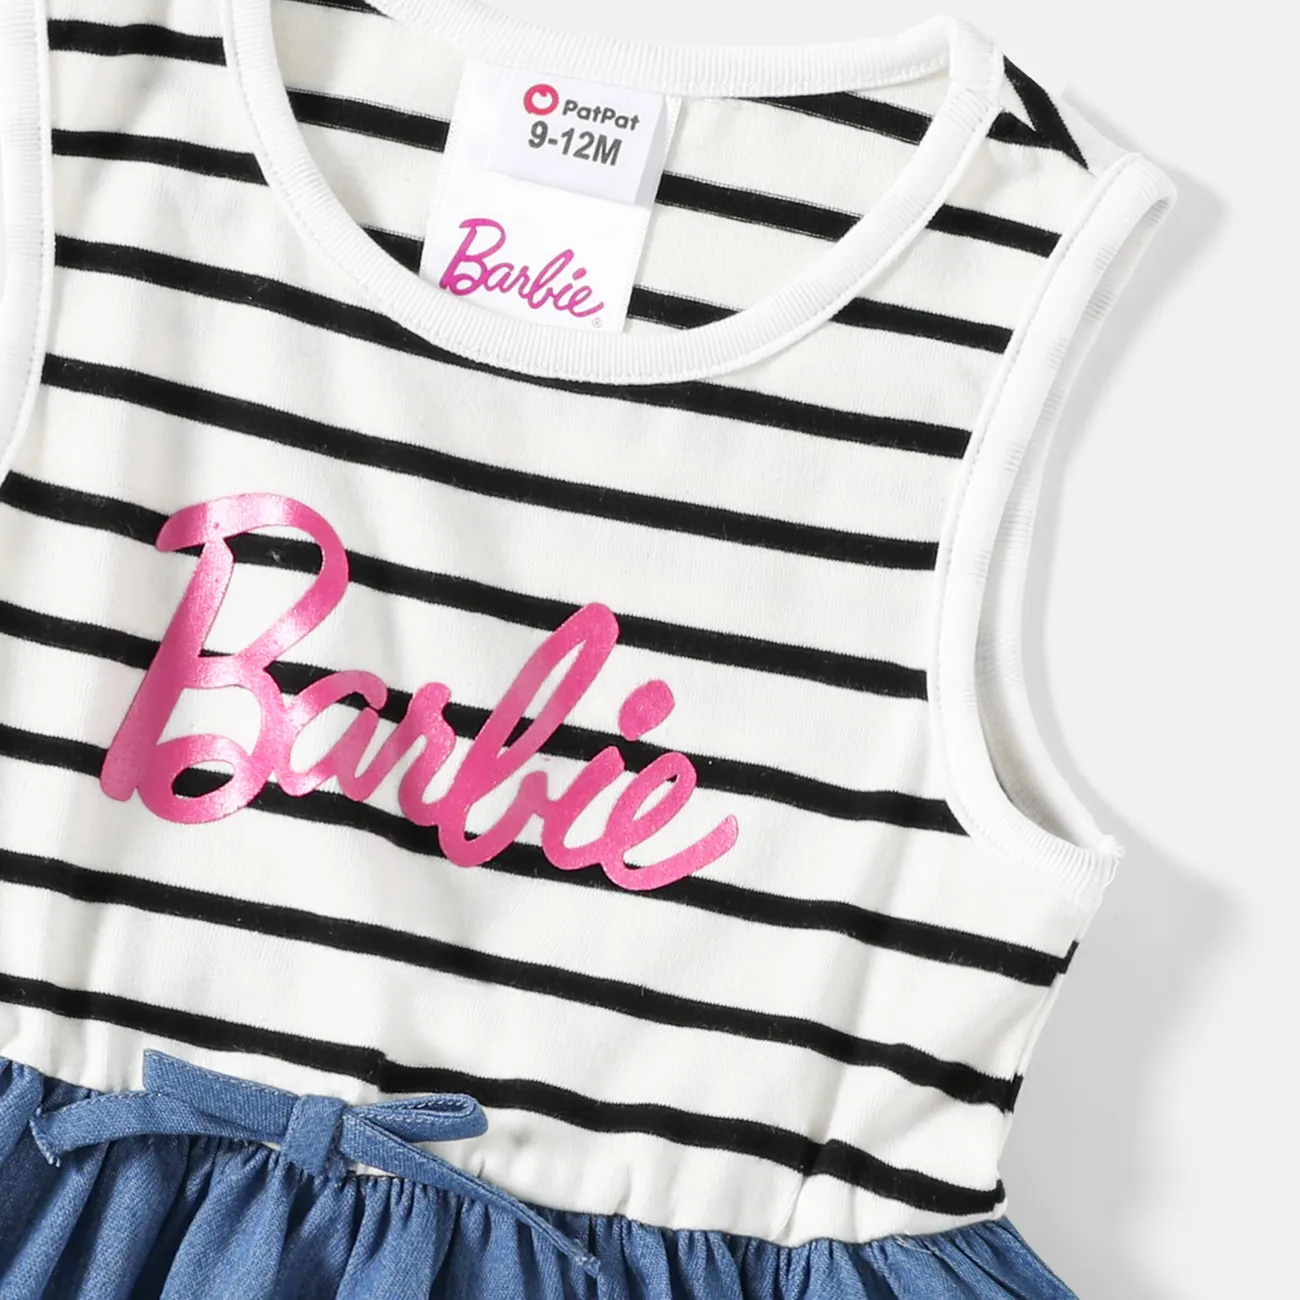 Barbie Mommy and Me Letter Graphic Cotton Striped Spliced Tank Dresses BLUEWHITE big image 1